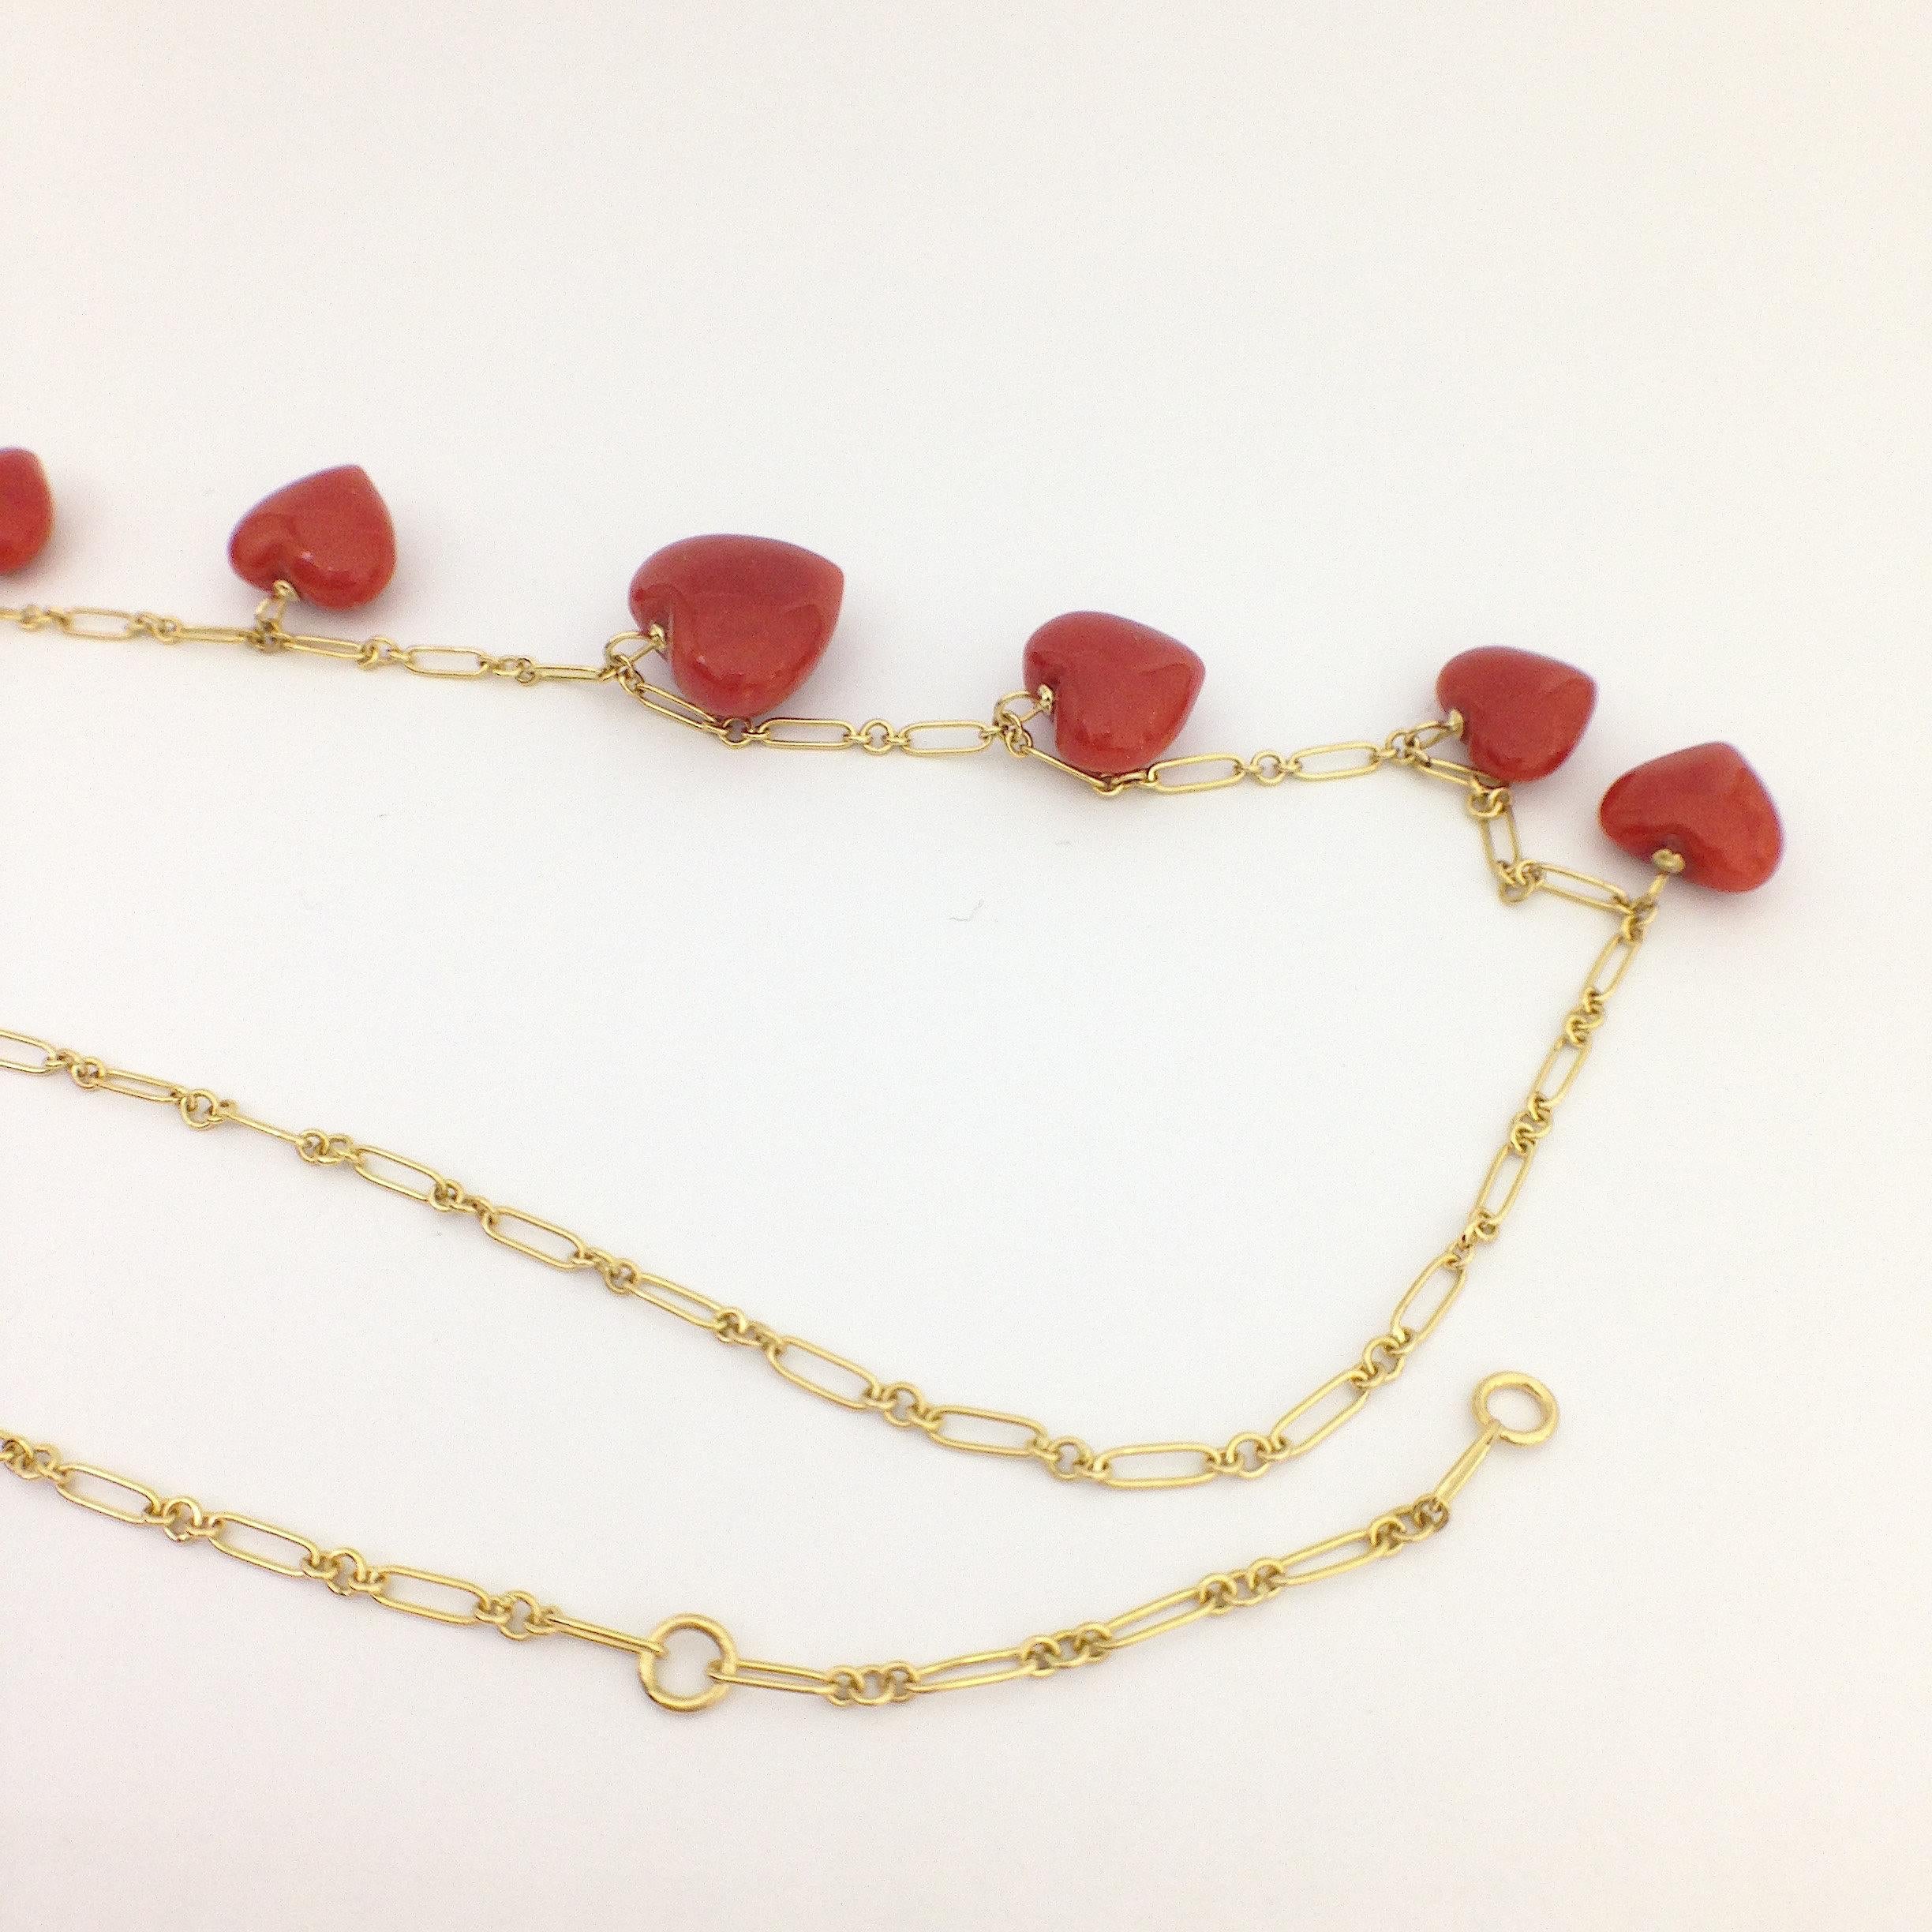 Petronilla Red Coral Heart Necklace Handmade in Italy 18 Karat Gold 2